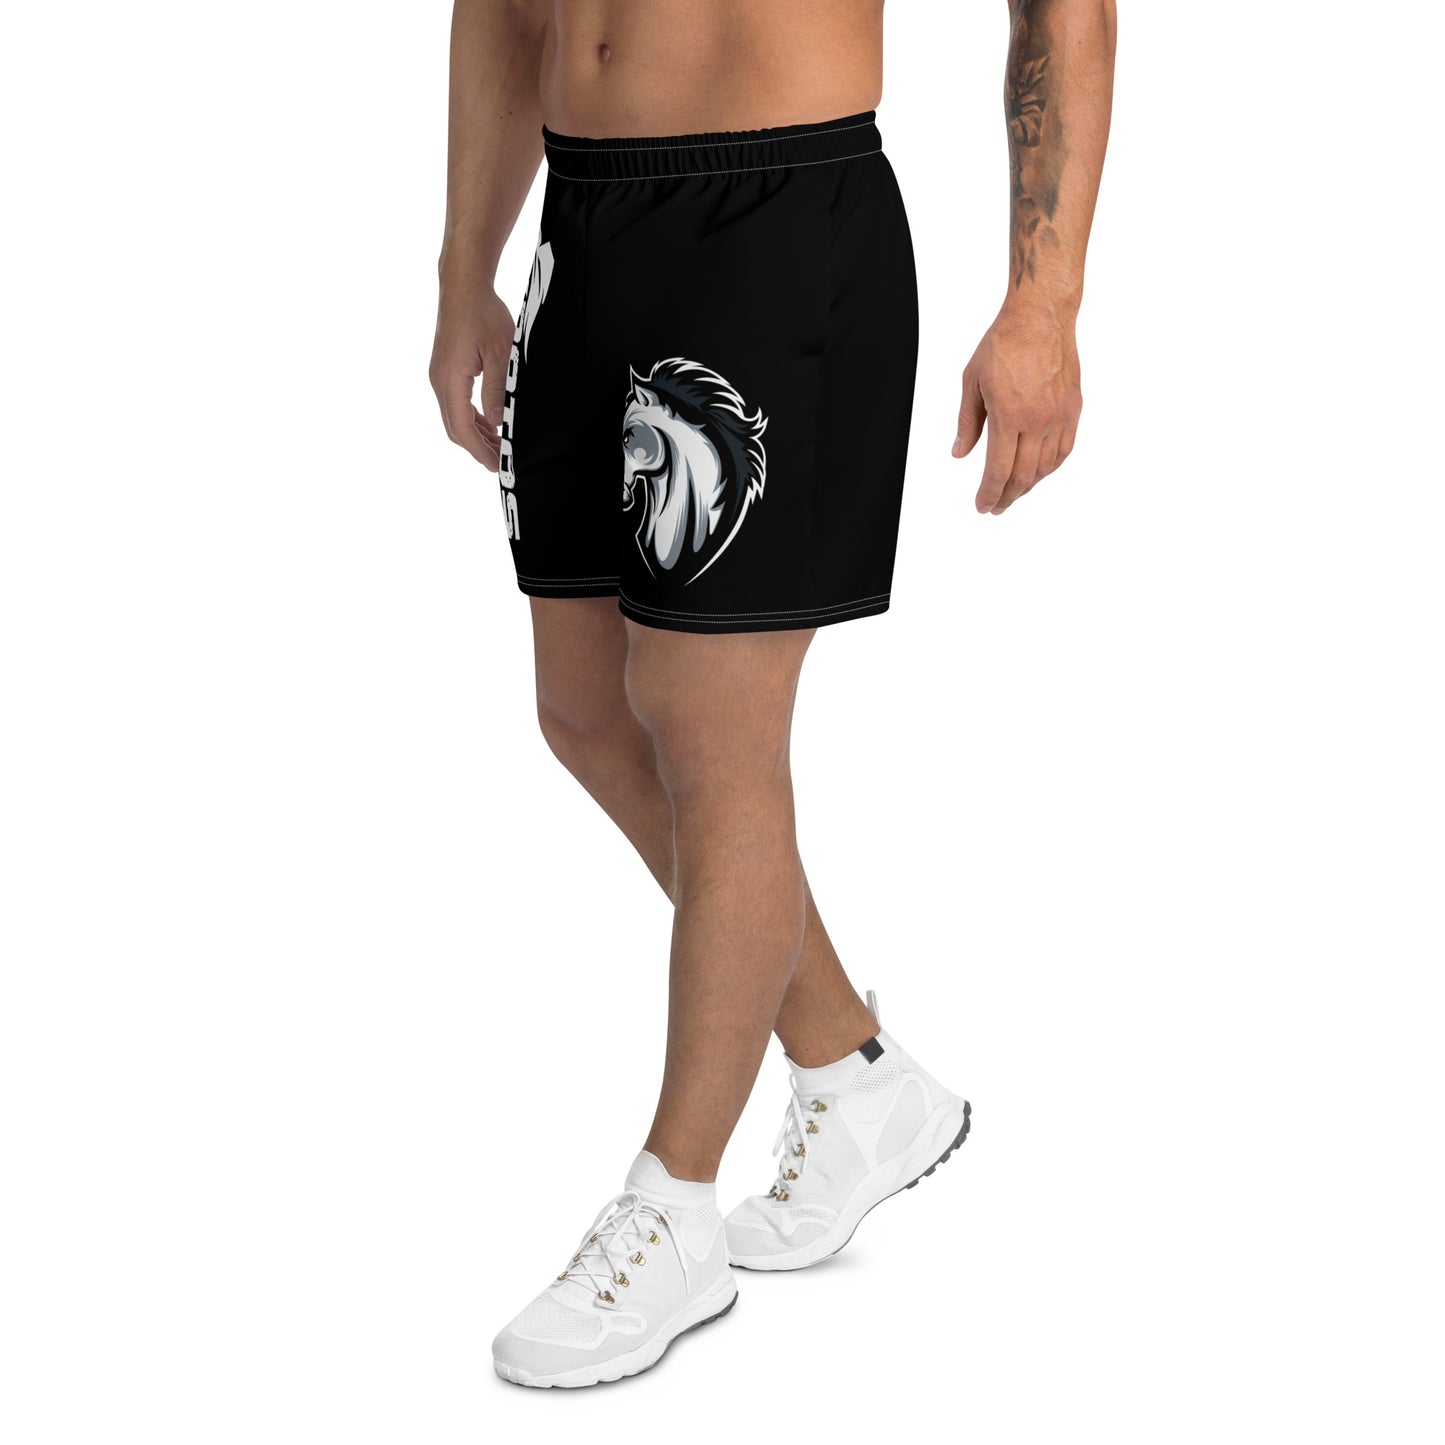 WHITE BRONCO Men's Recycled Athletic Shorts